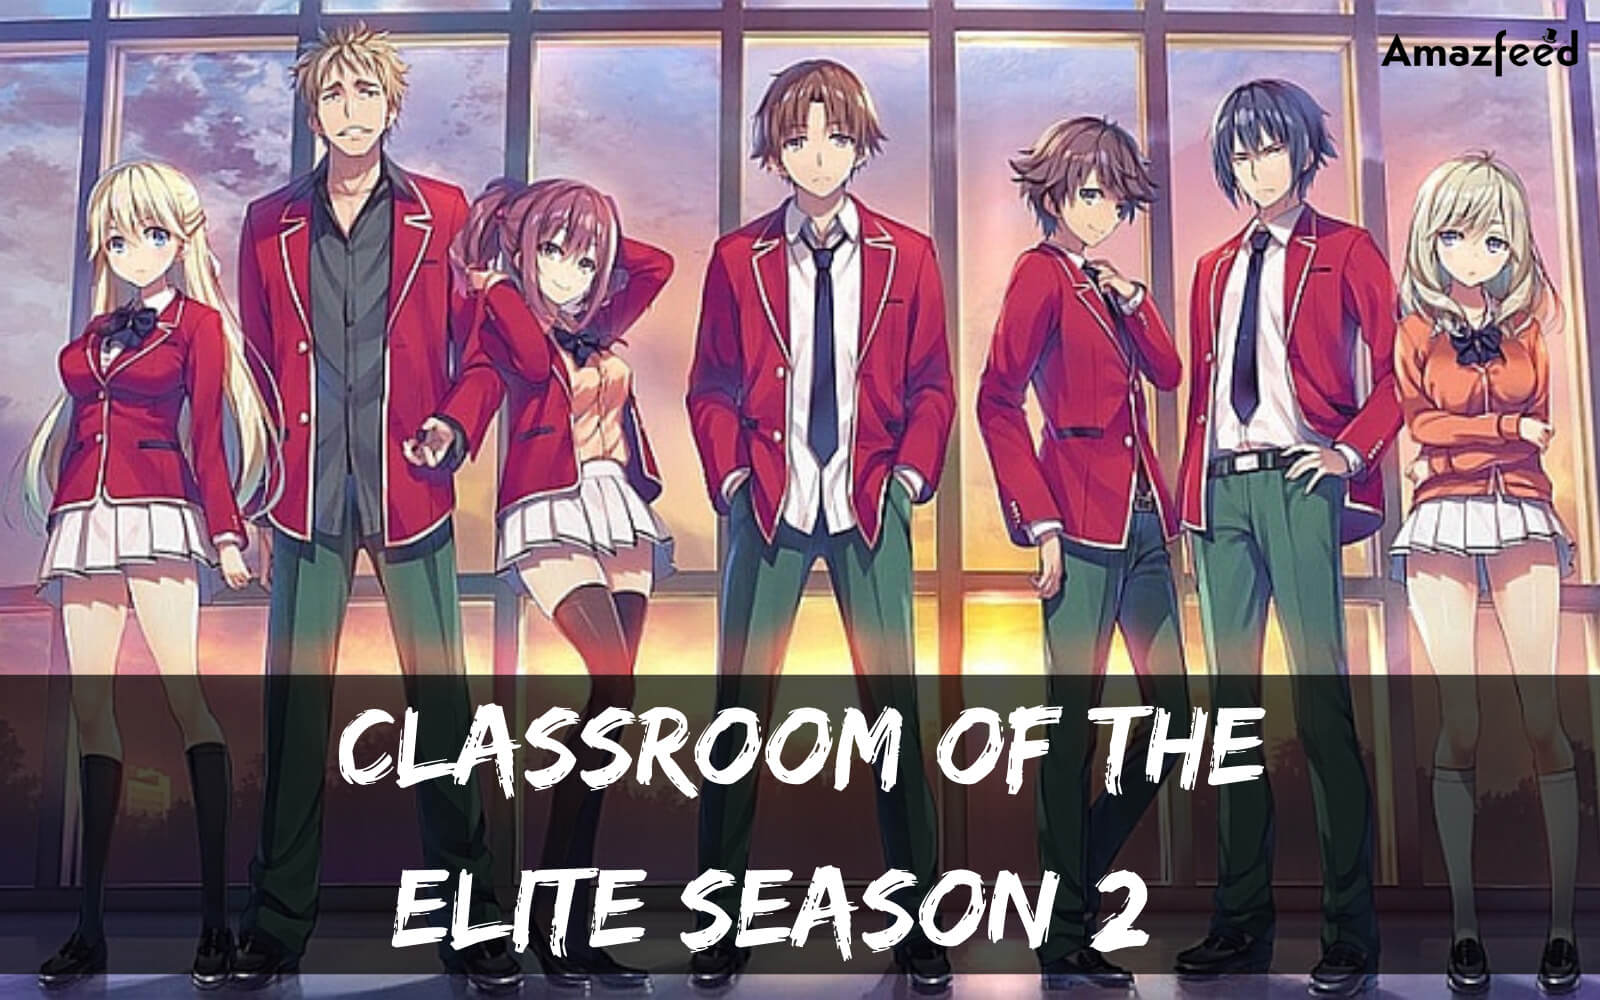 Classroom of the Elite Season 2 Episode 2 Release Date & Time